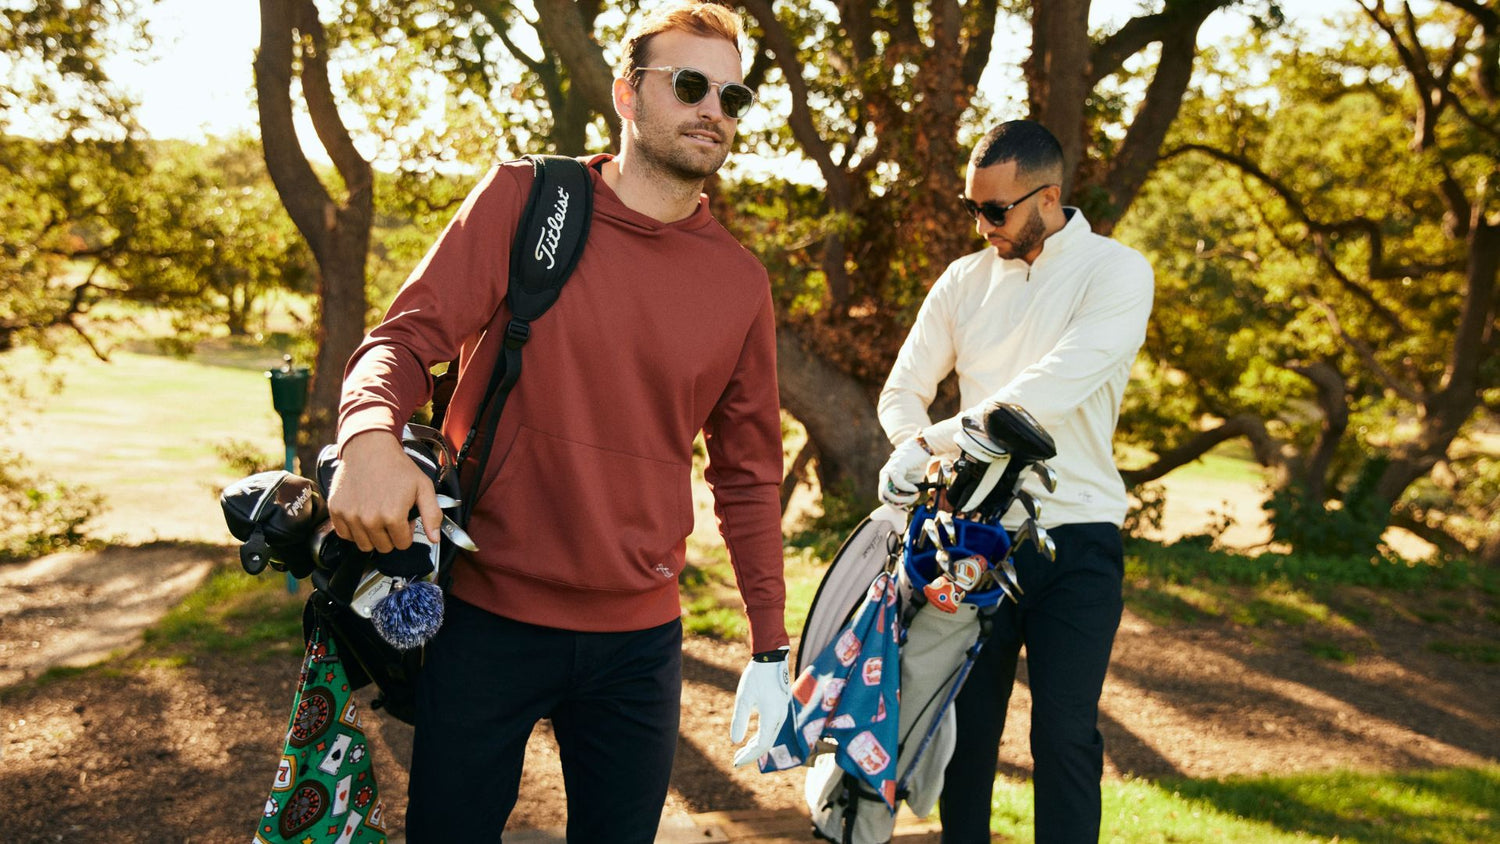 Golfers wearing cool gear and carrying golf bags